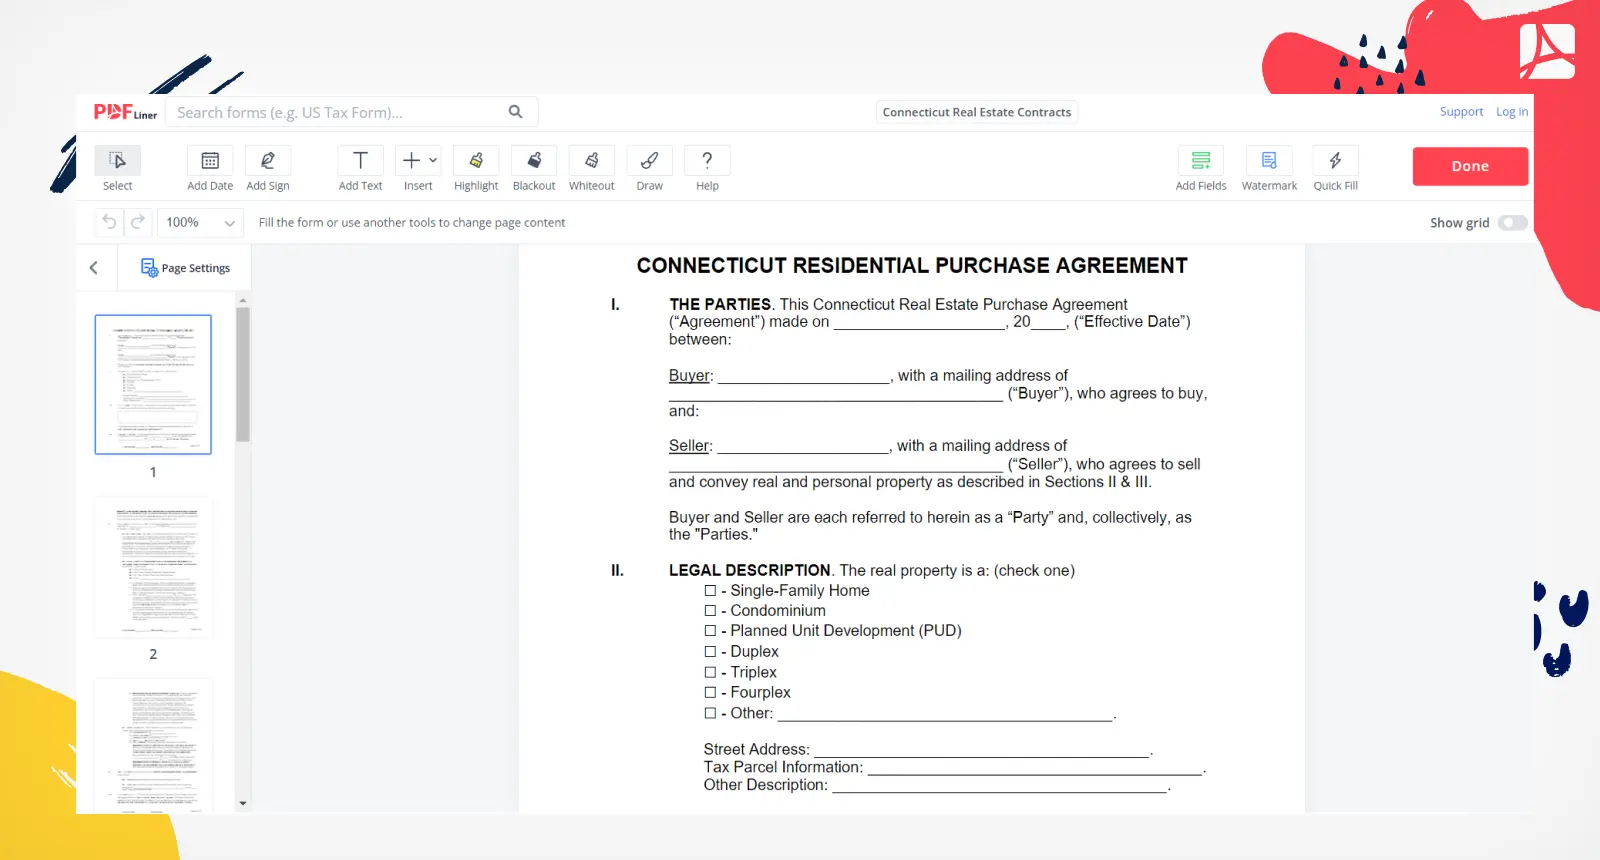 Connecticut Real Estate Contract Form Screenshot